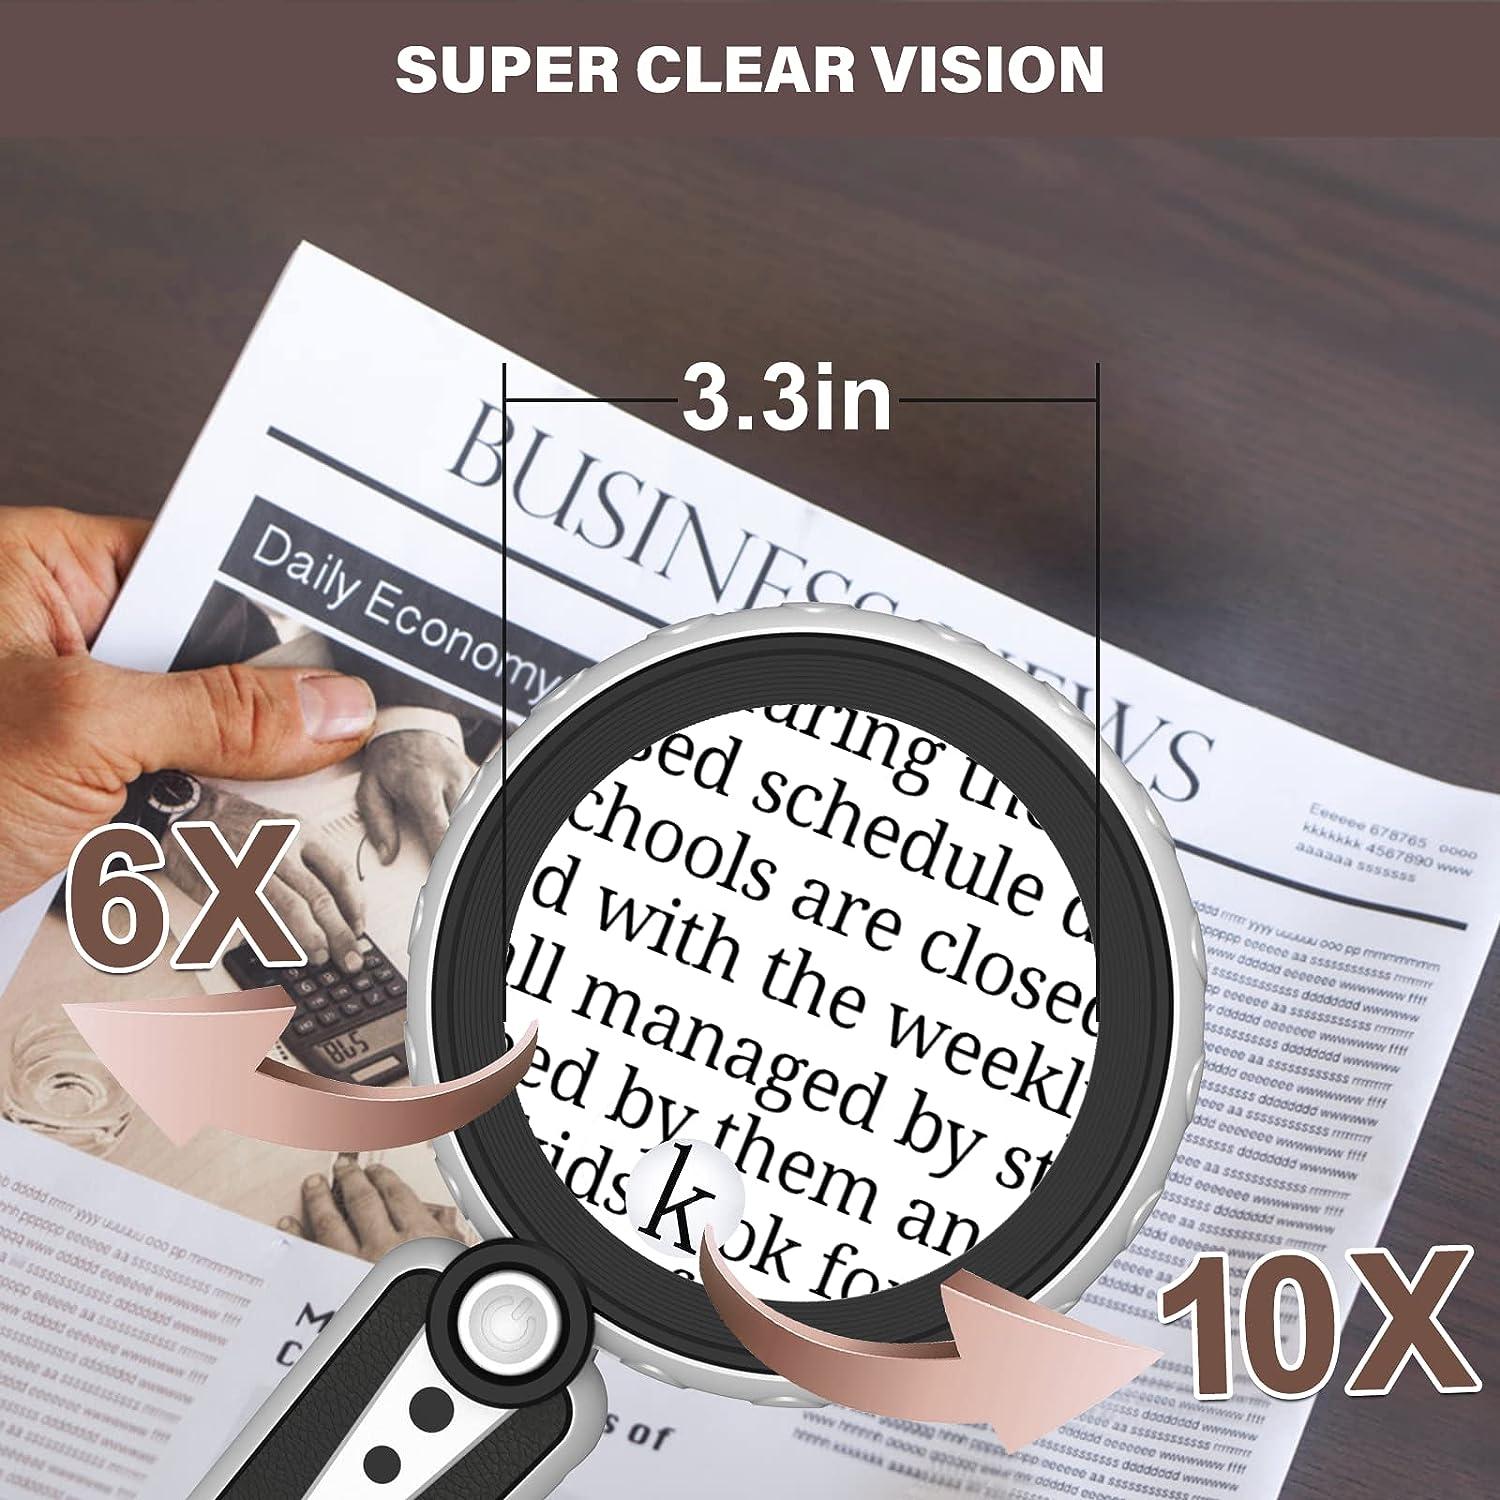 6X 10X Magnifying Glass with Light-12 LED Handheld Illuminated Lighted  Magnifying Glasses, 3 Cool and Warm Light Modes & Adjustable Brightness,  Magnifier for Close Work, Seniors Reading,Powered by USB Black & Silver